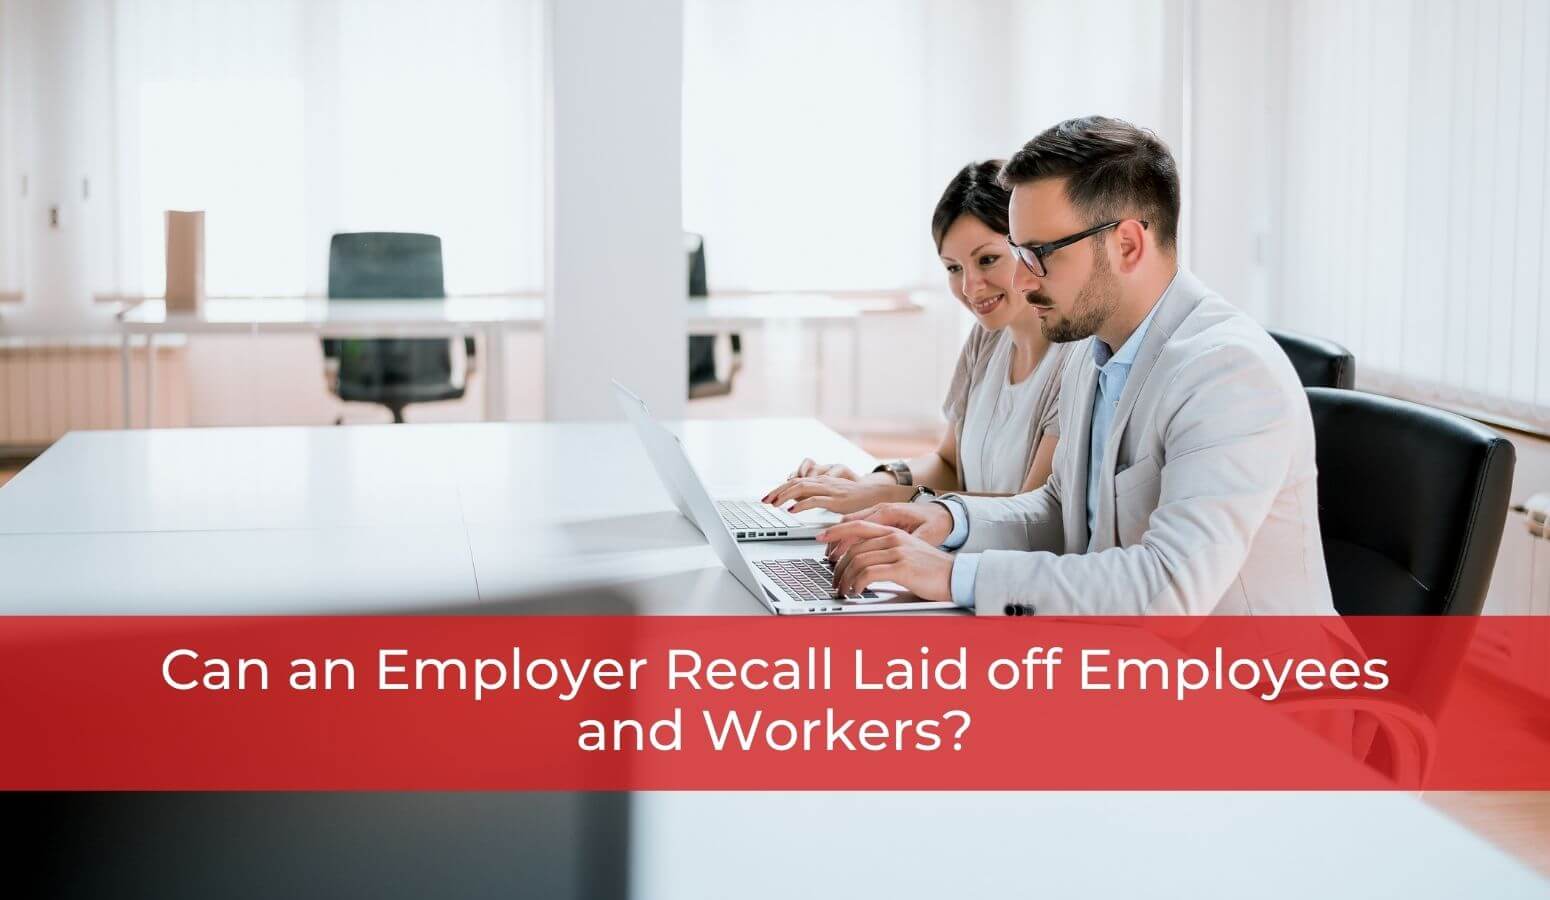 Can an Employer Recall Laid off Employees and Workers?